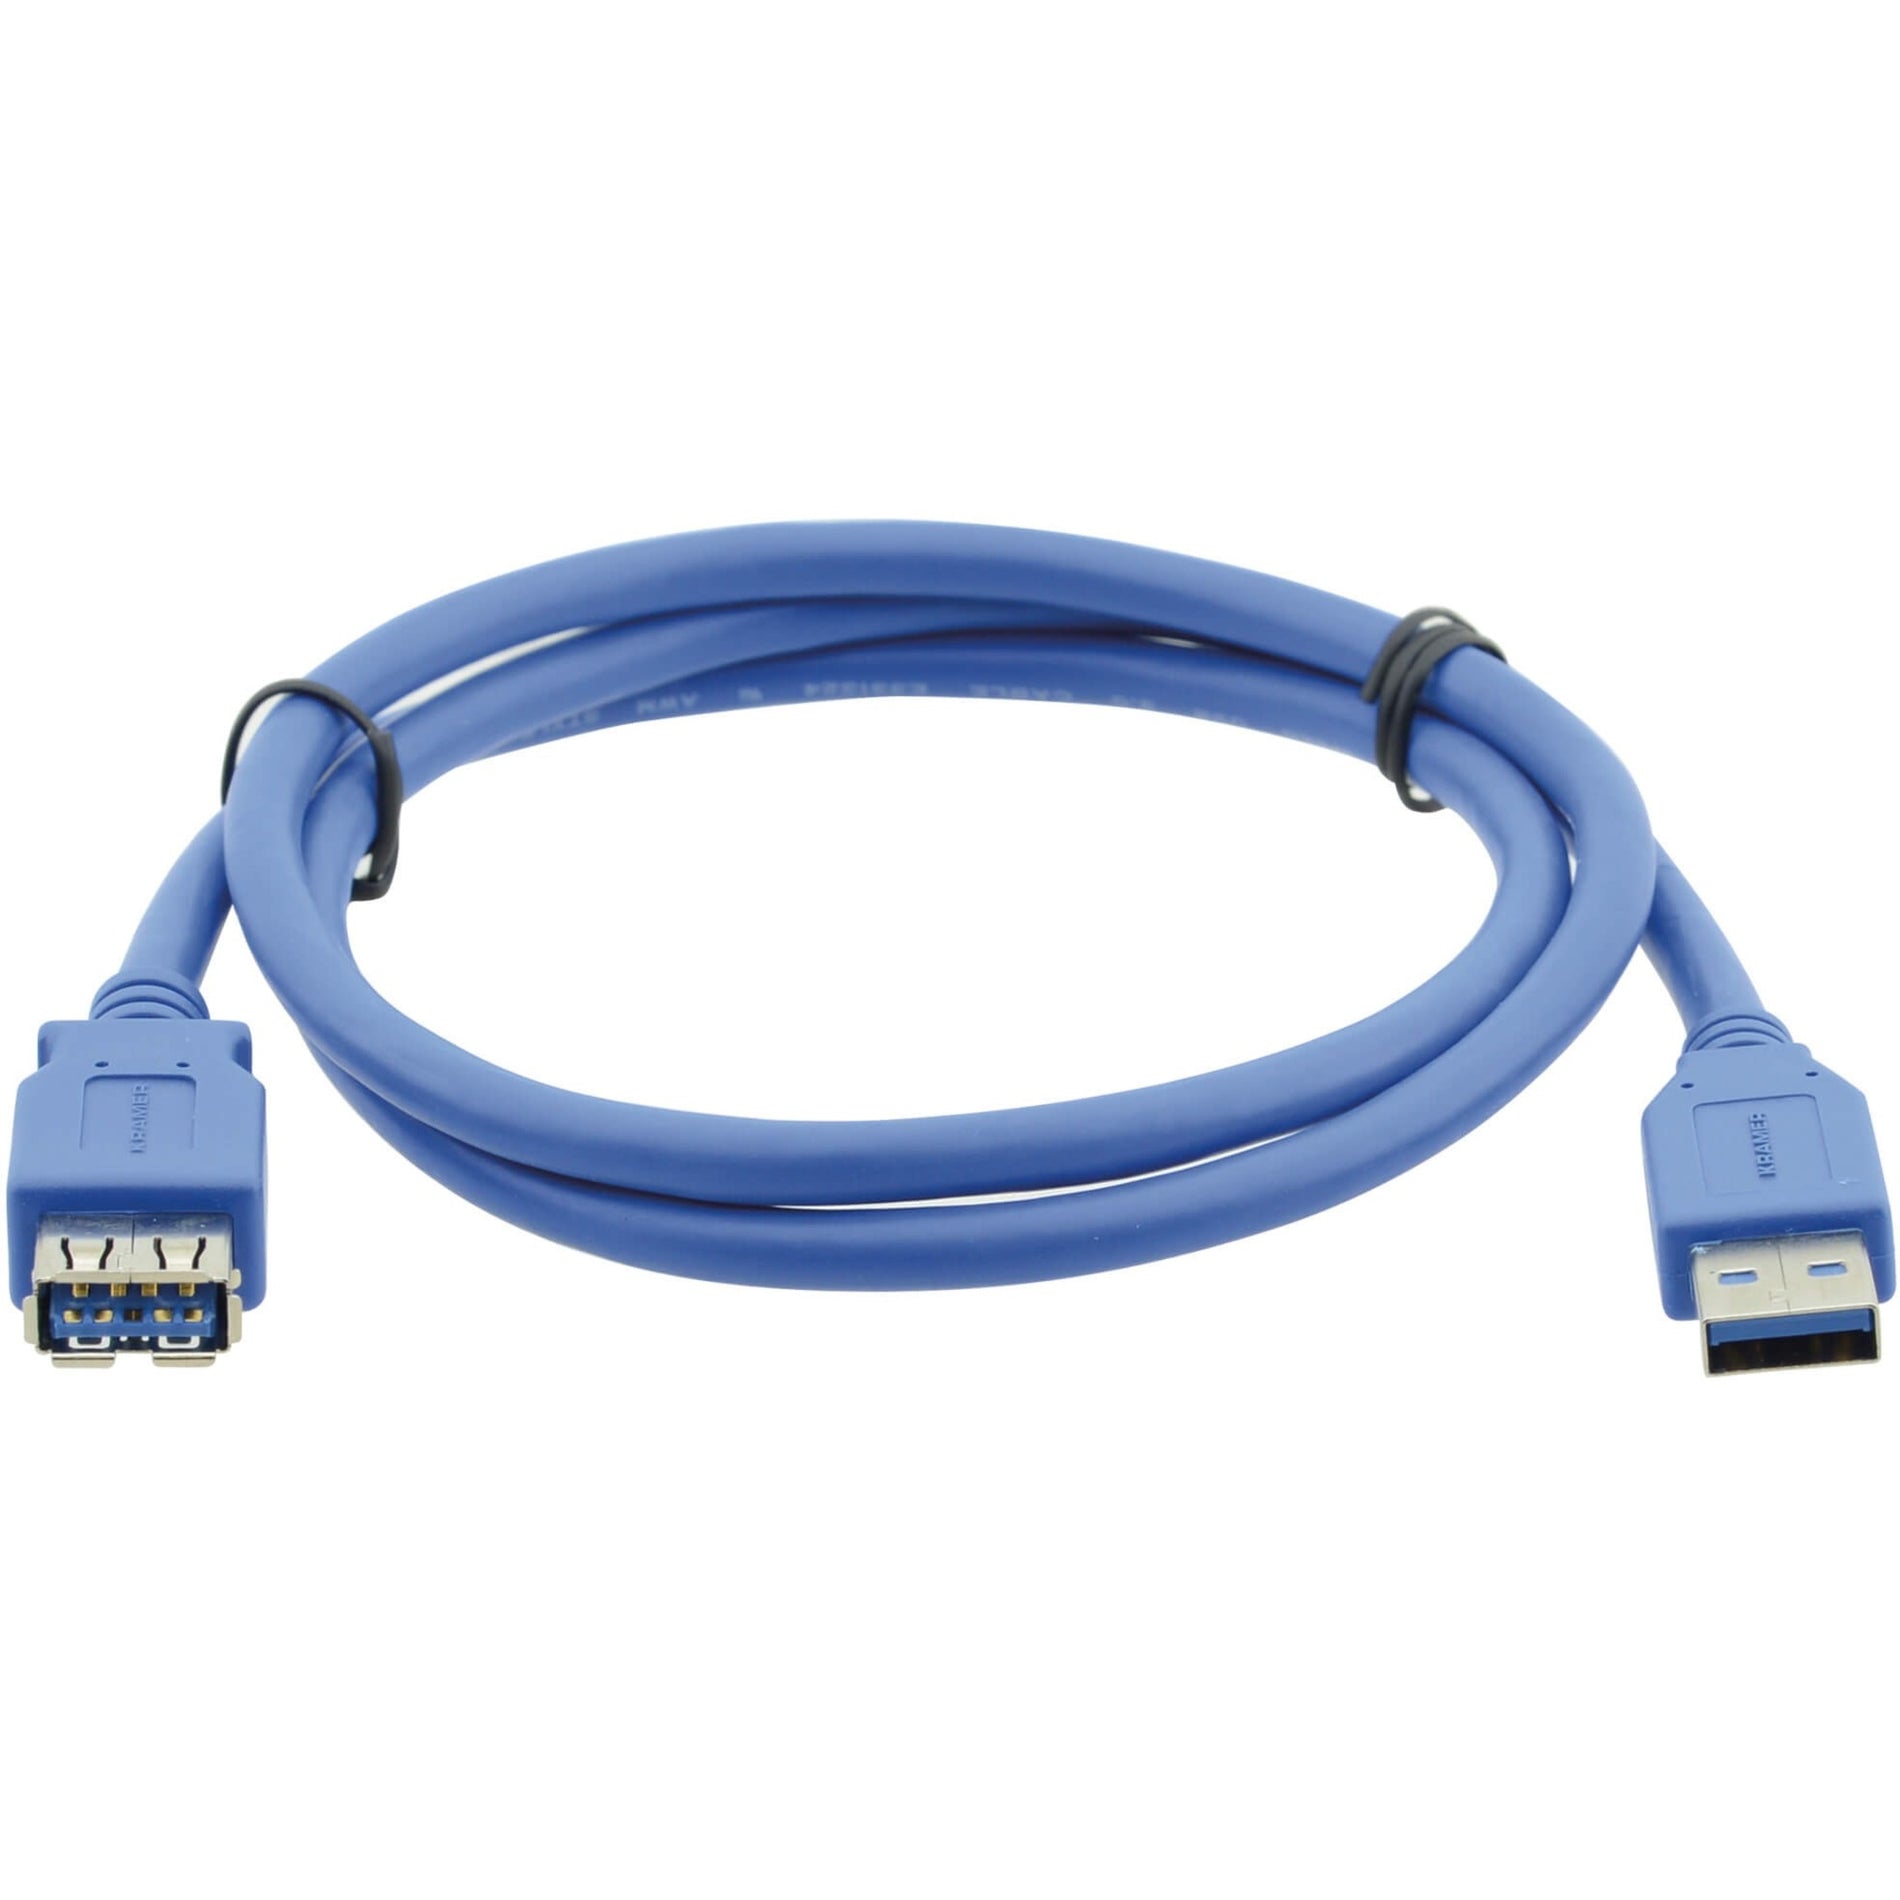 Kramer 96-02310006 USB 3.0 A (M) to A (F) Extension Cable, 6 ft, Strain Relief, EMI/RF Protection